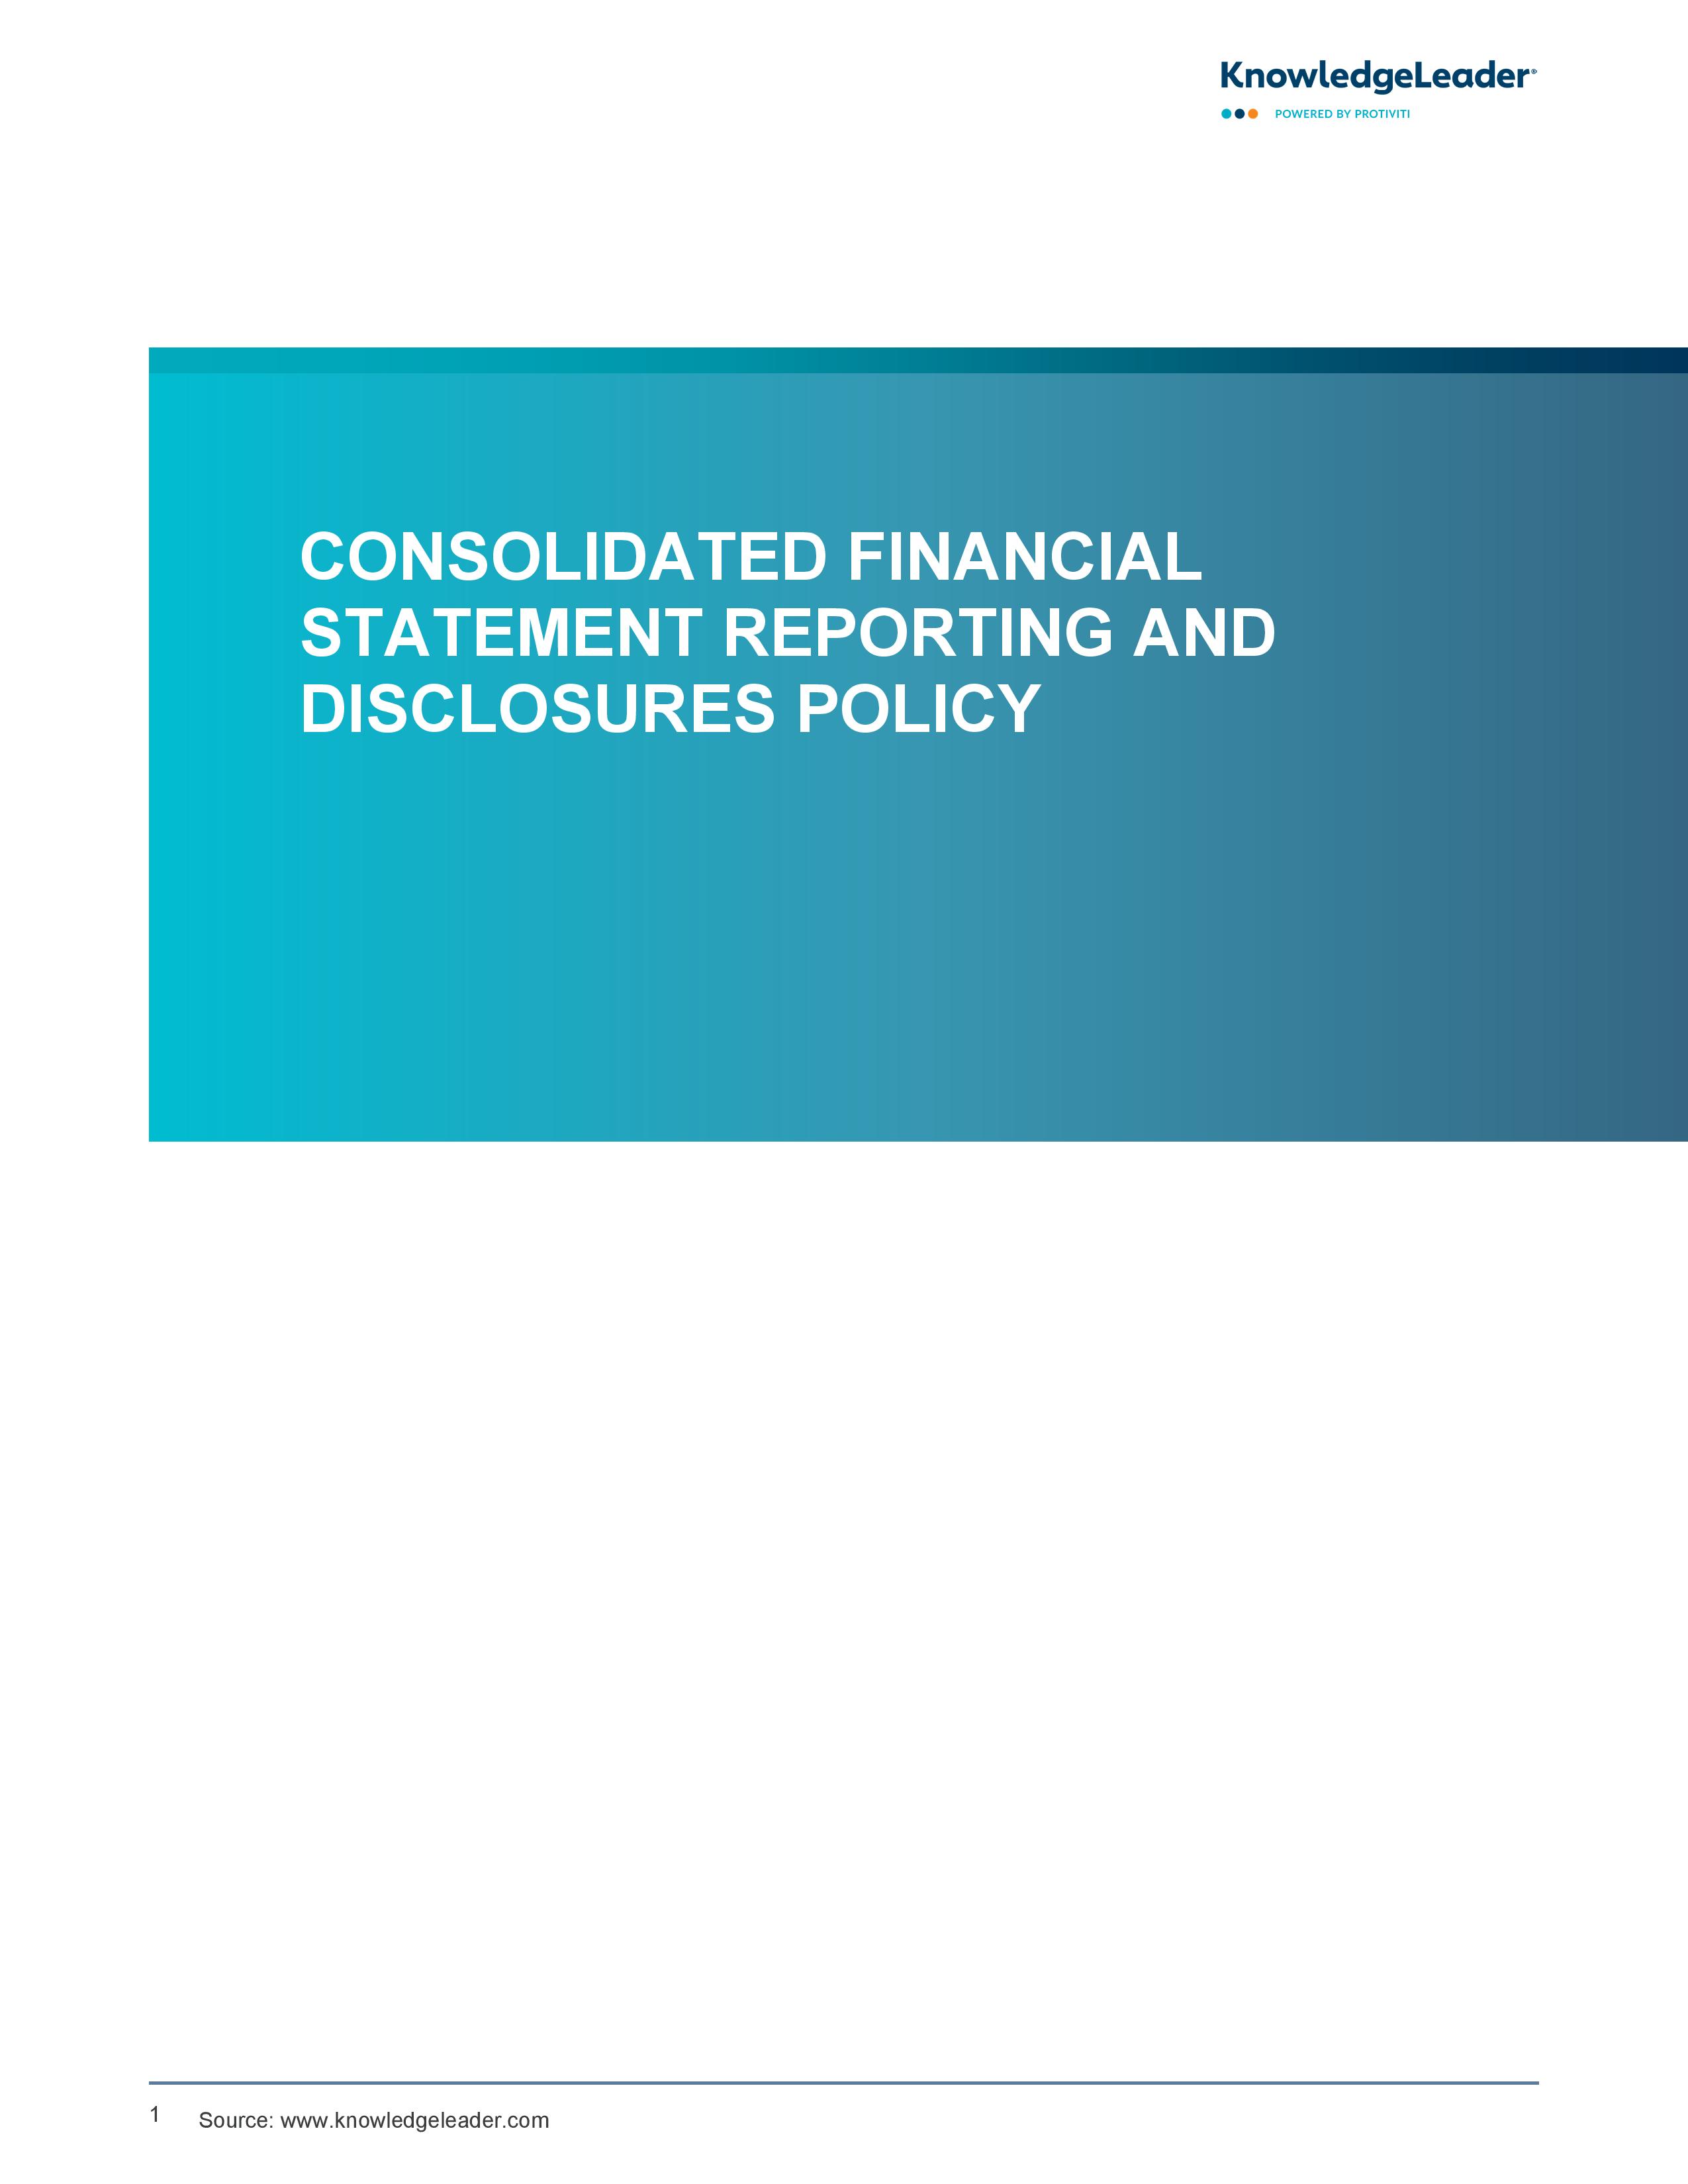 Screenshot of the First Page of Consolidated Financial Statement Reporting and Disclosures Policy